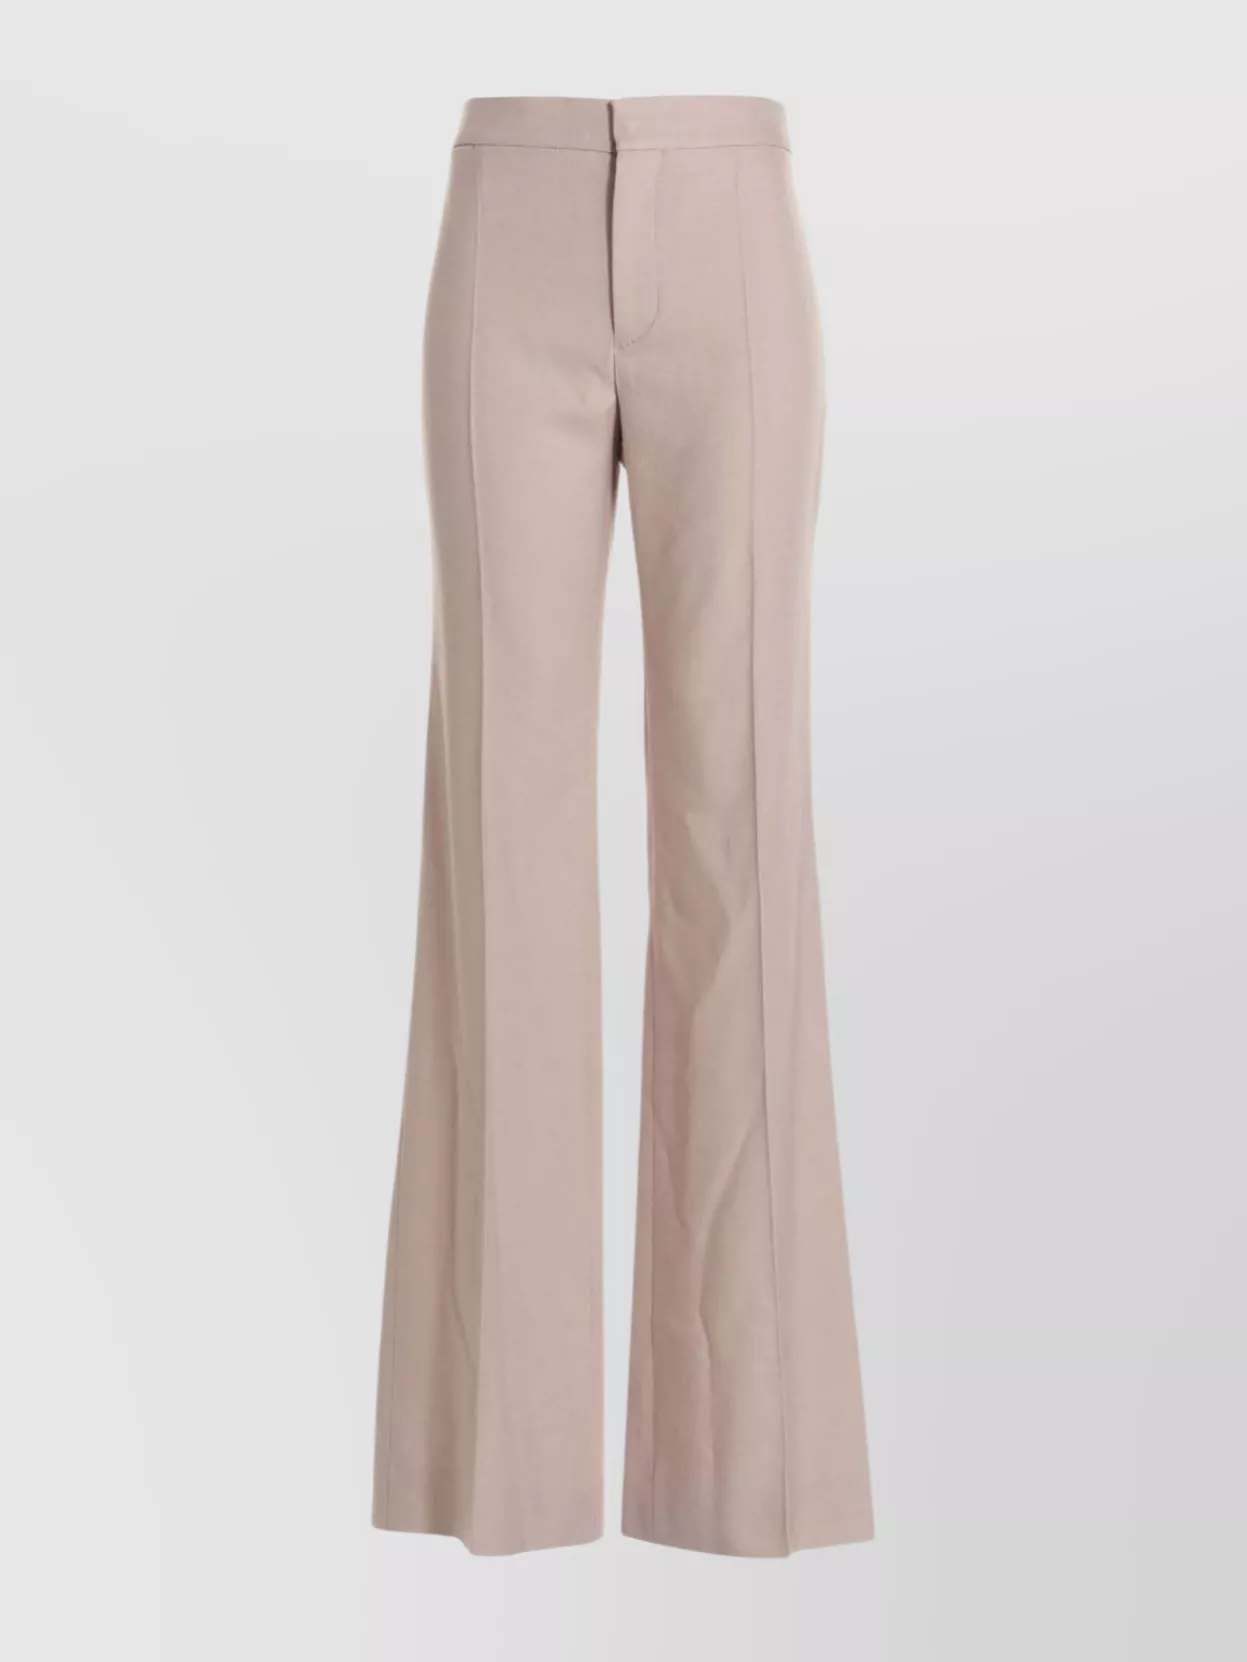 Chloé High Waist Flared Leg Trousers With Front Creases